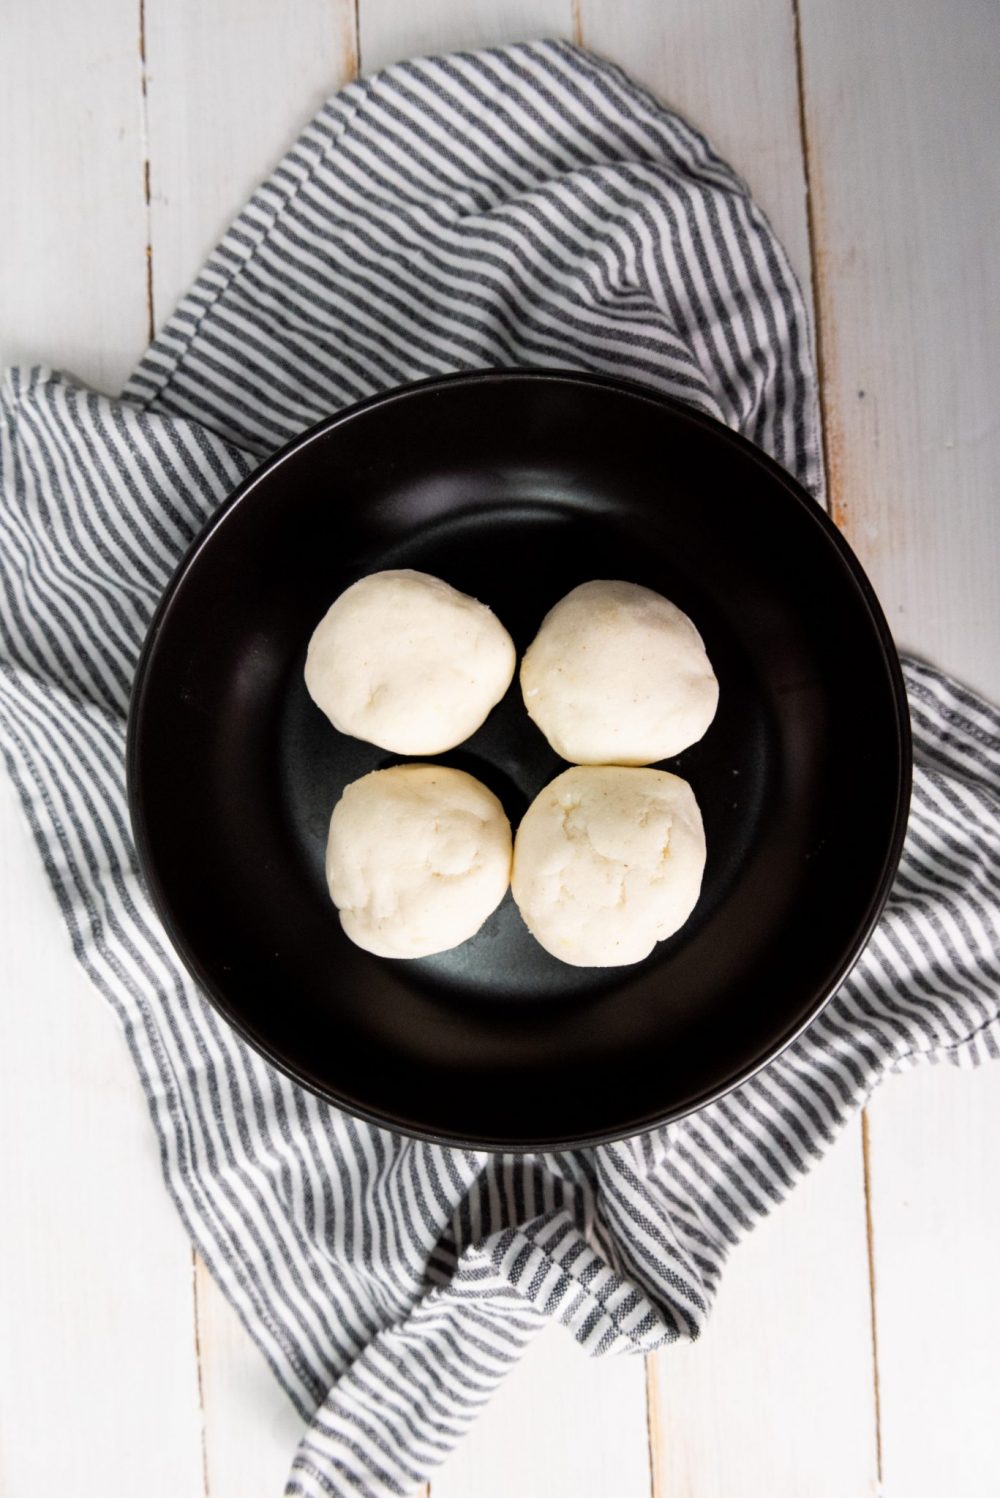 How to make Arepas with cheese at home